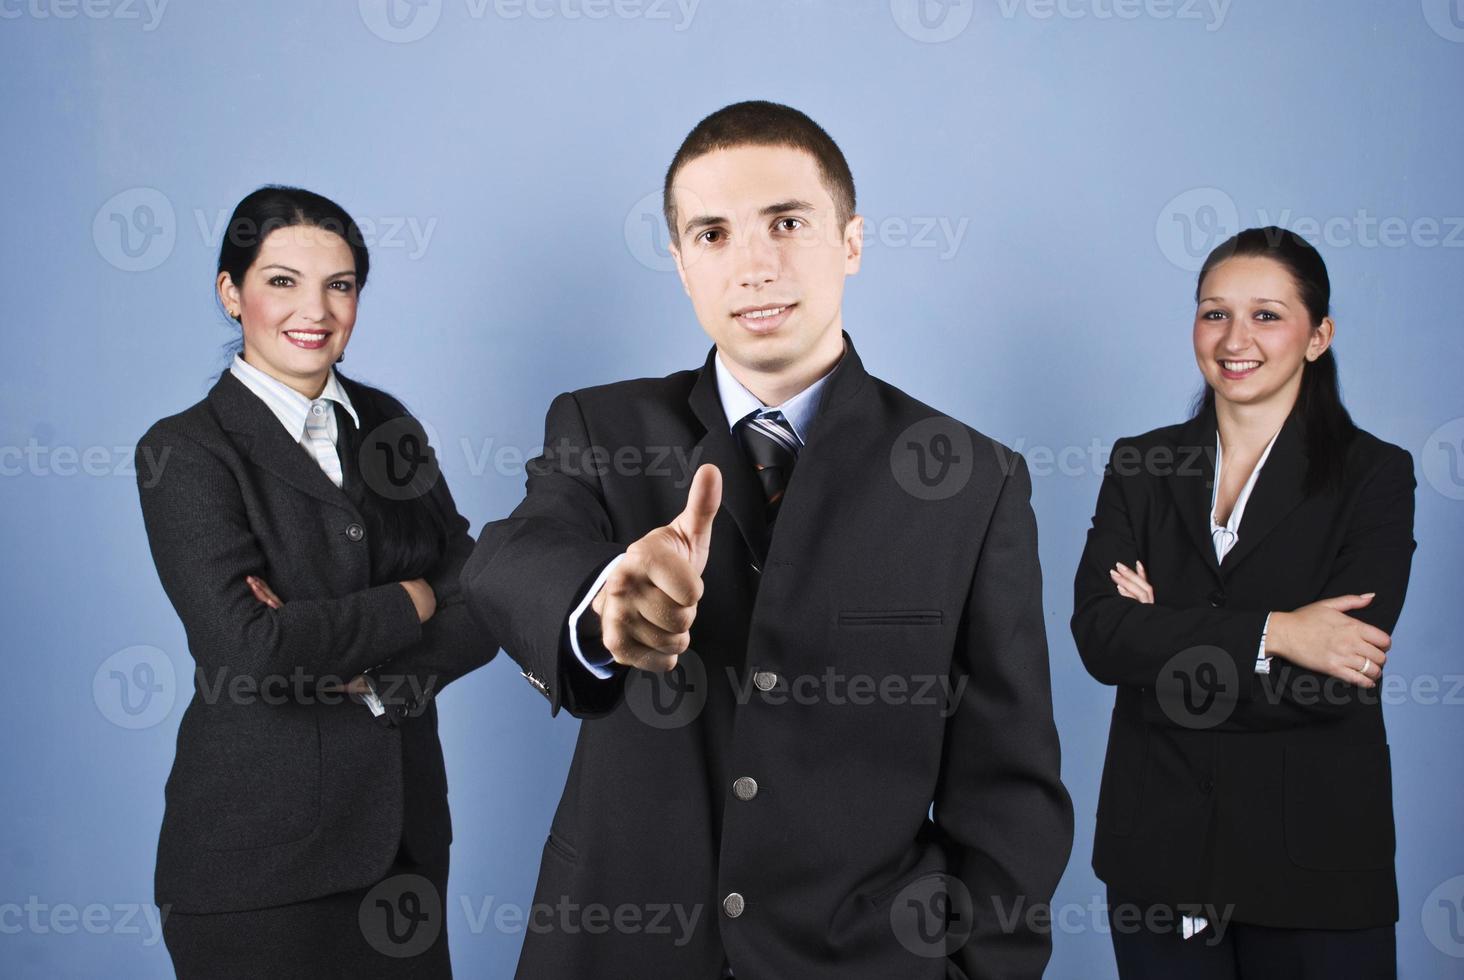 Successful business people team photo